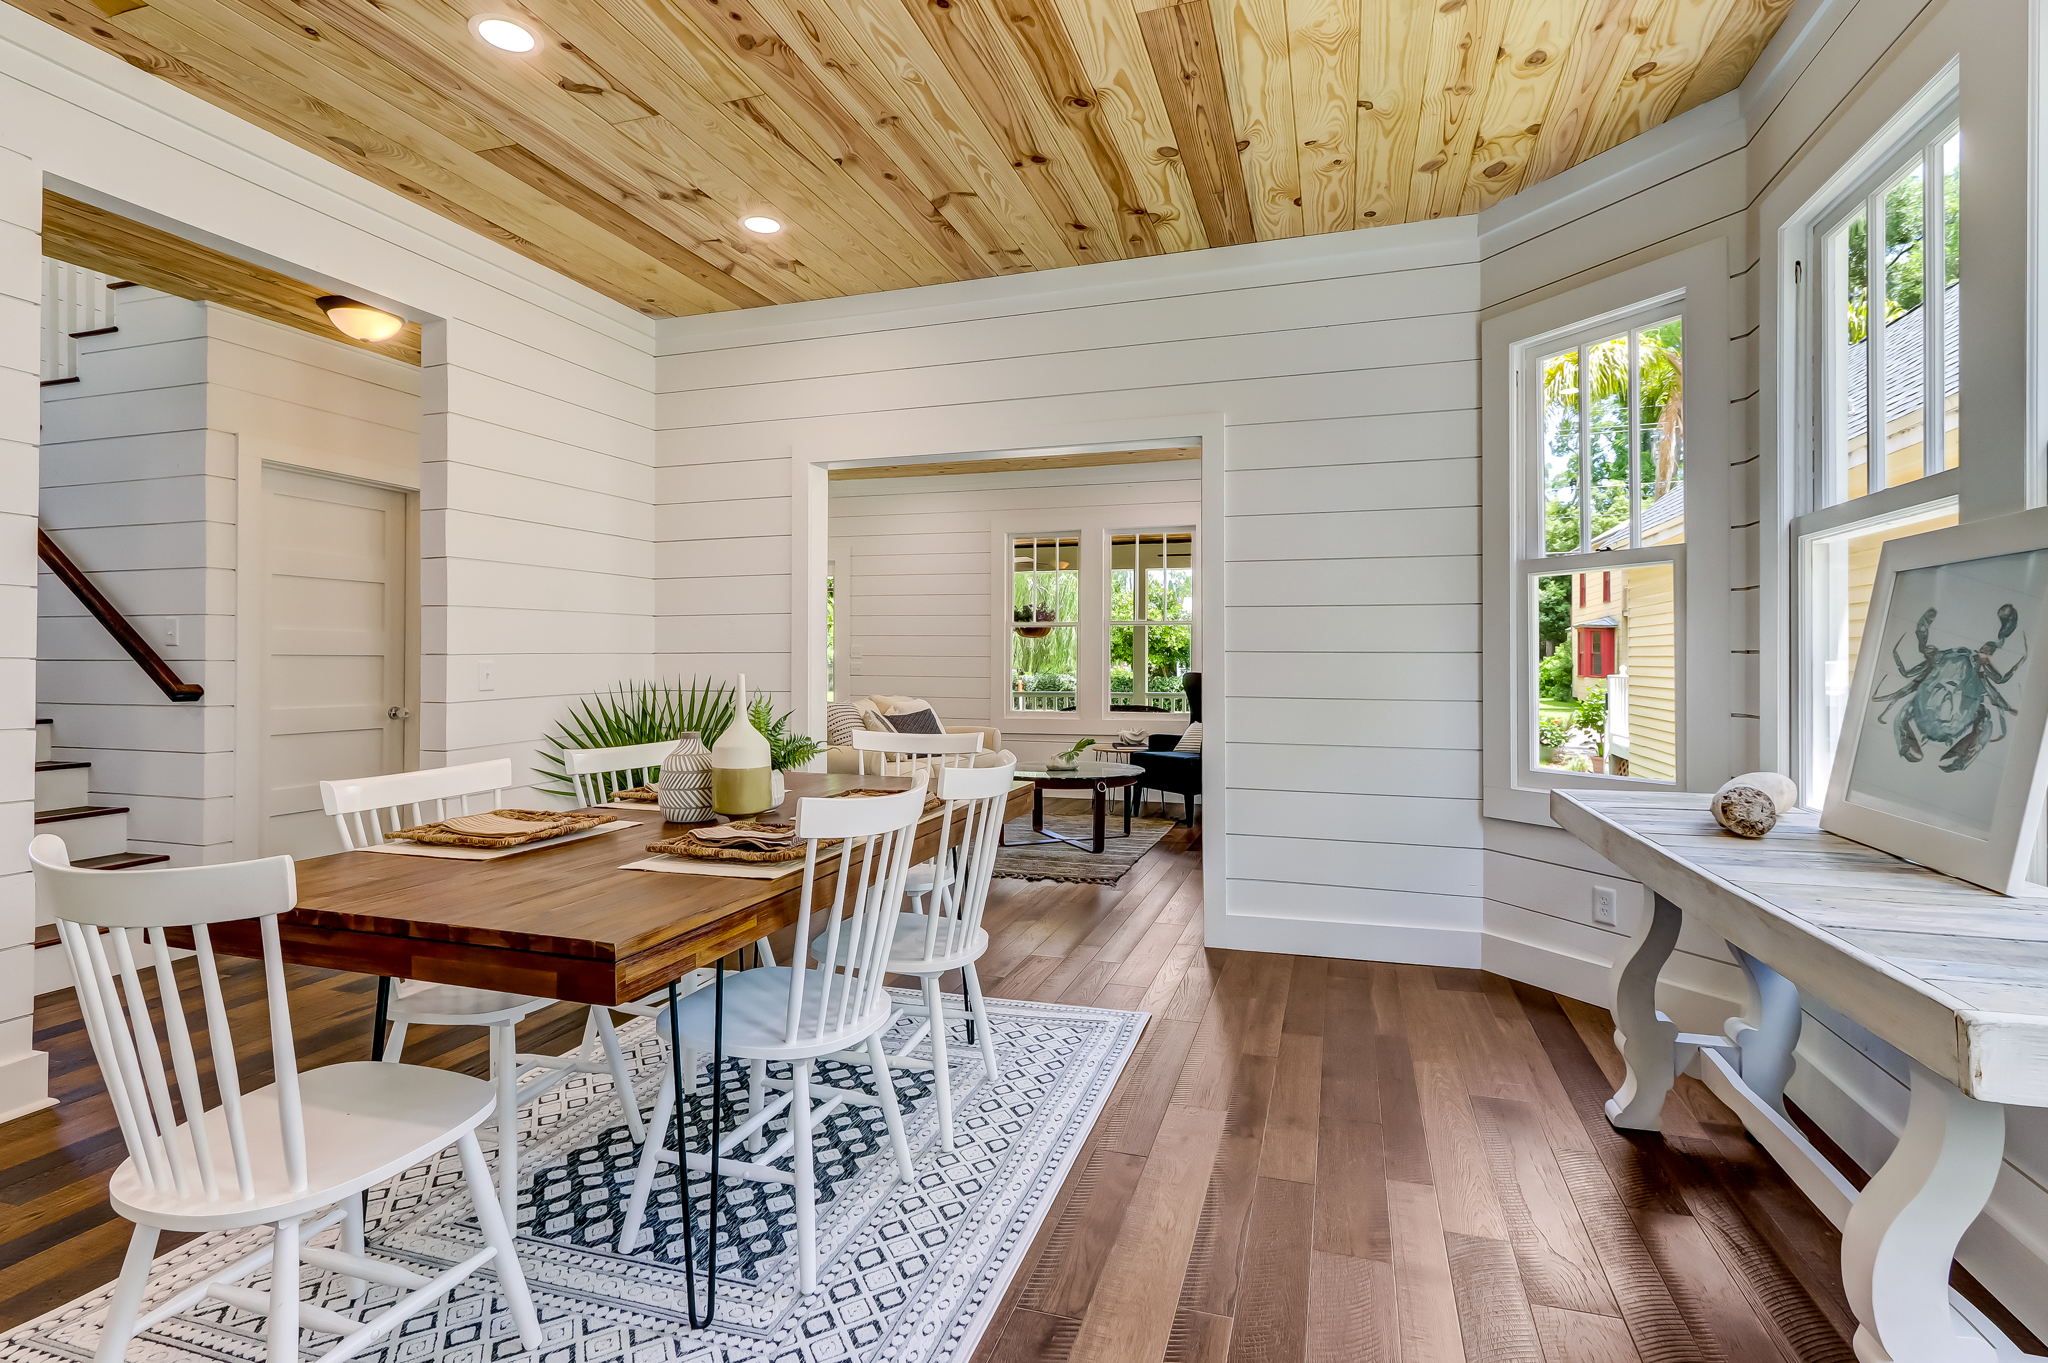 Artisan planked wood floors are throughout entire house